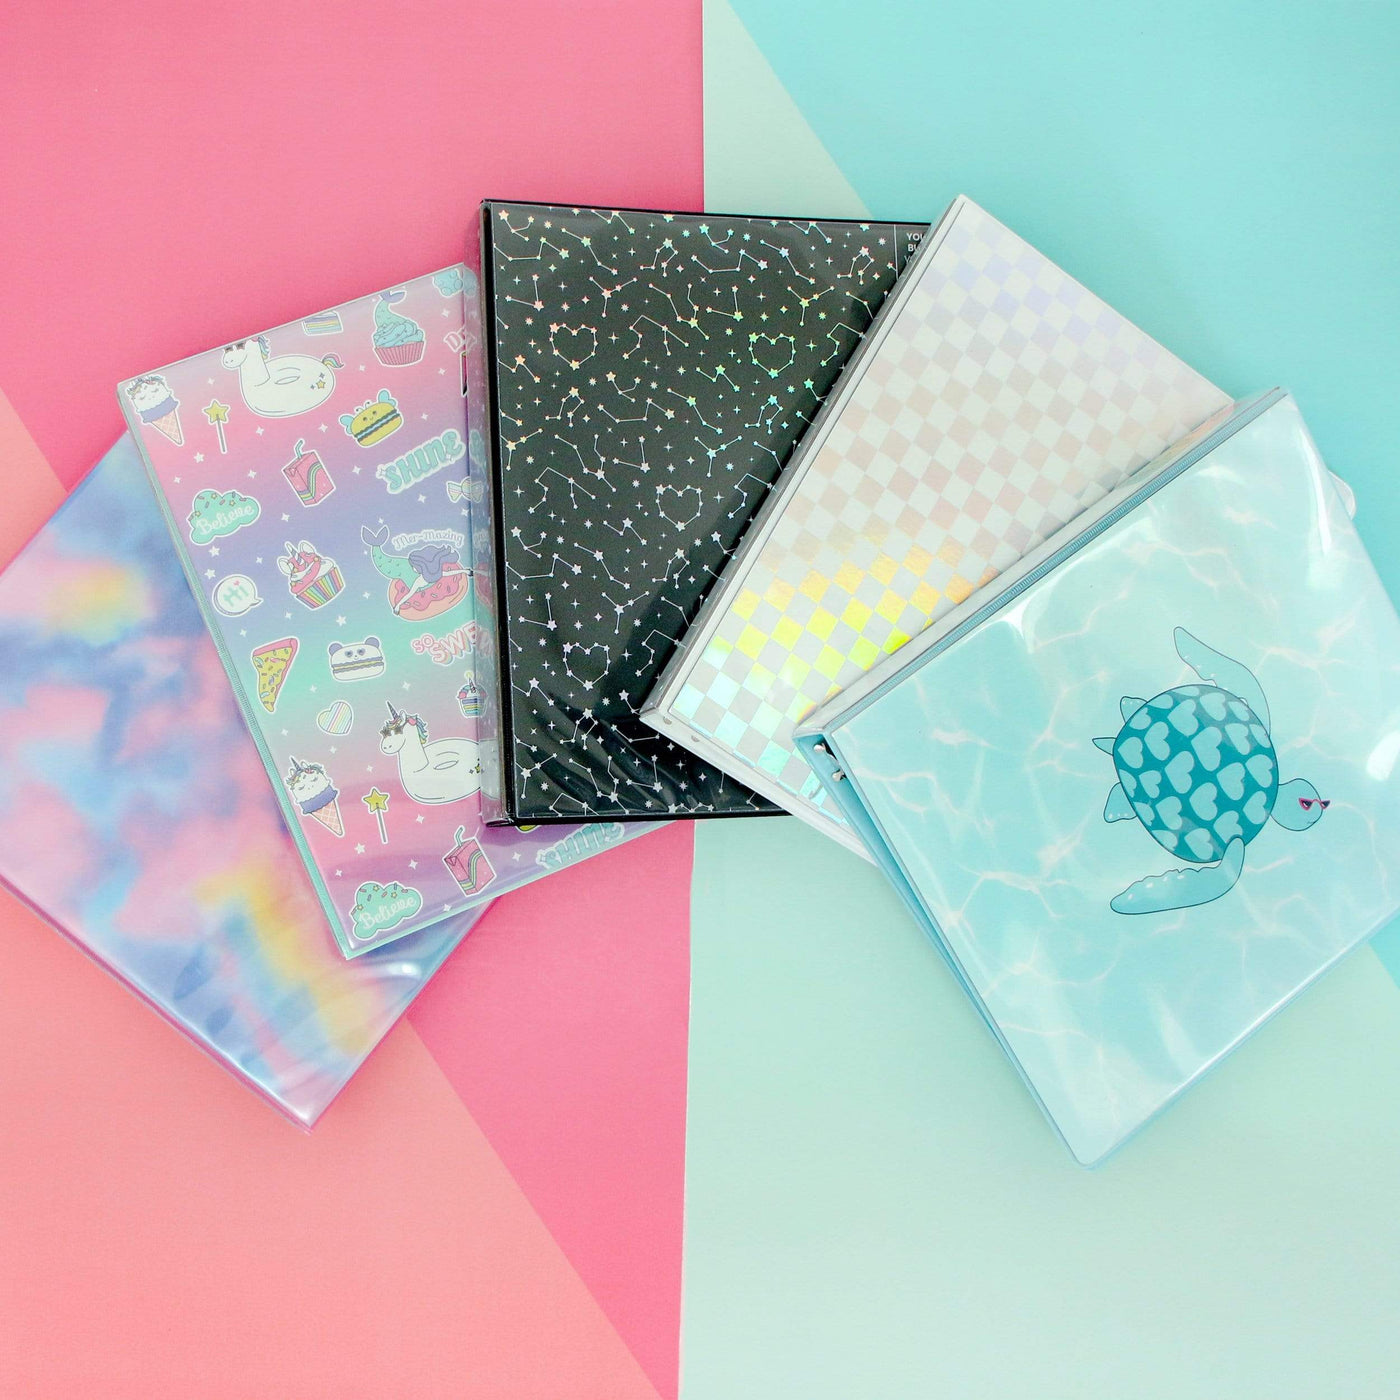 lifestyle image of tie-dye, sweet dreams, constellation, holographic check and aqua turtle binders